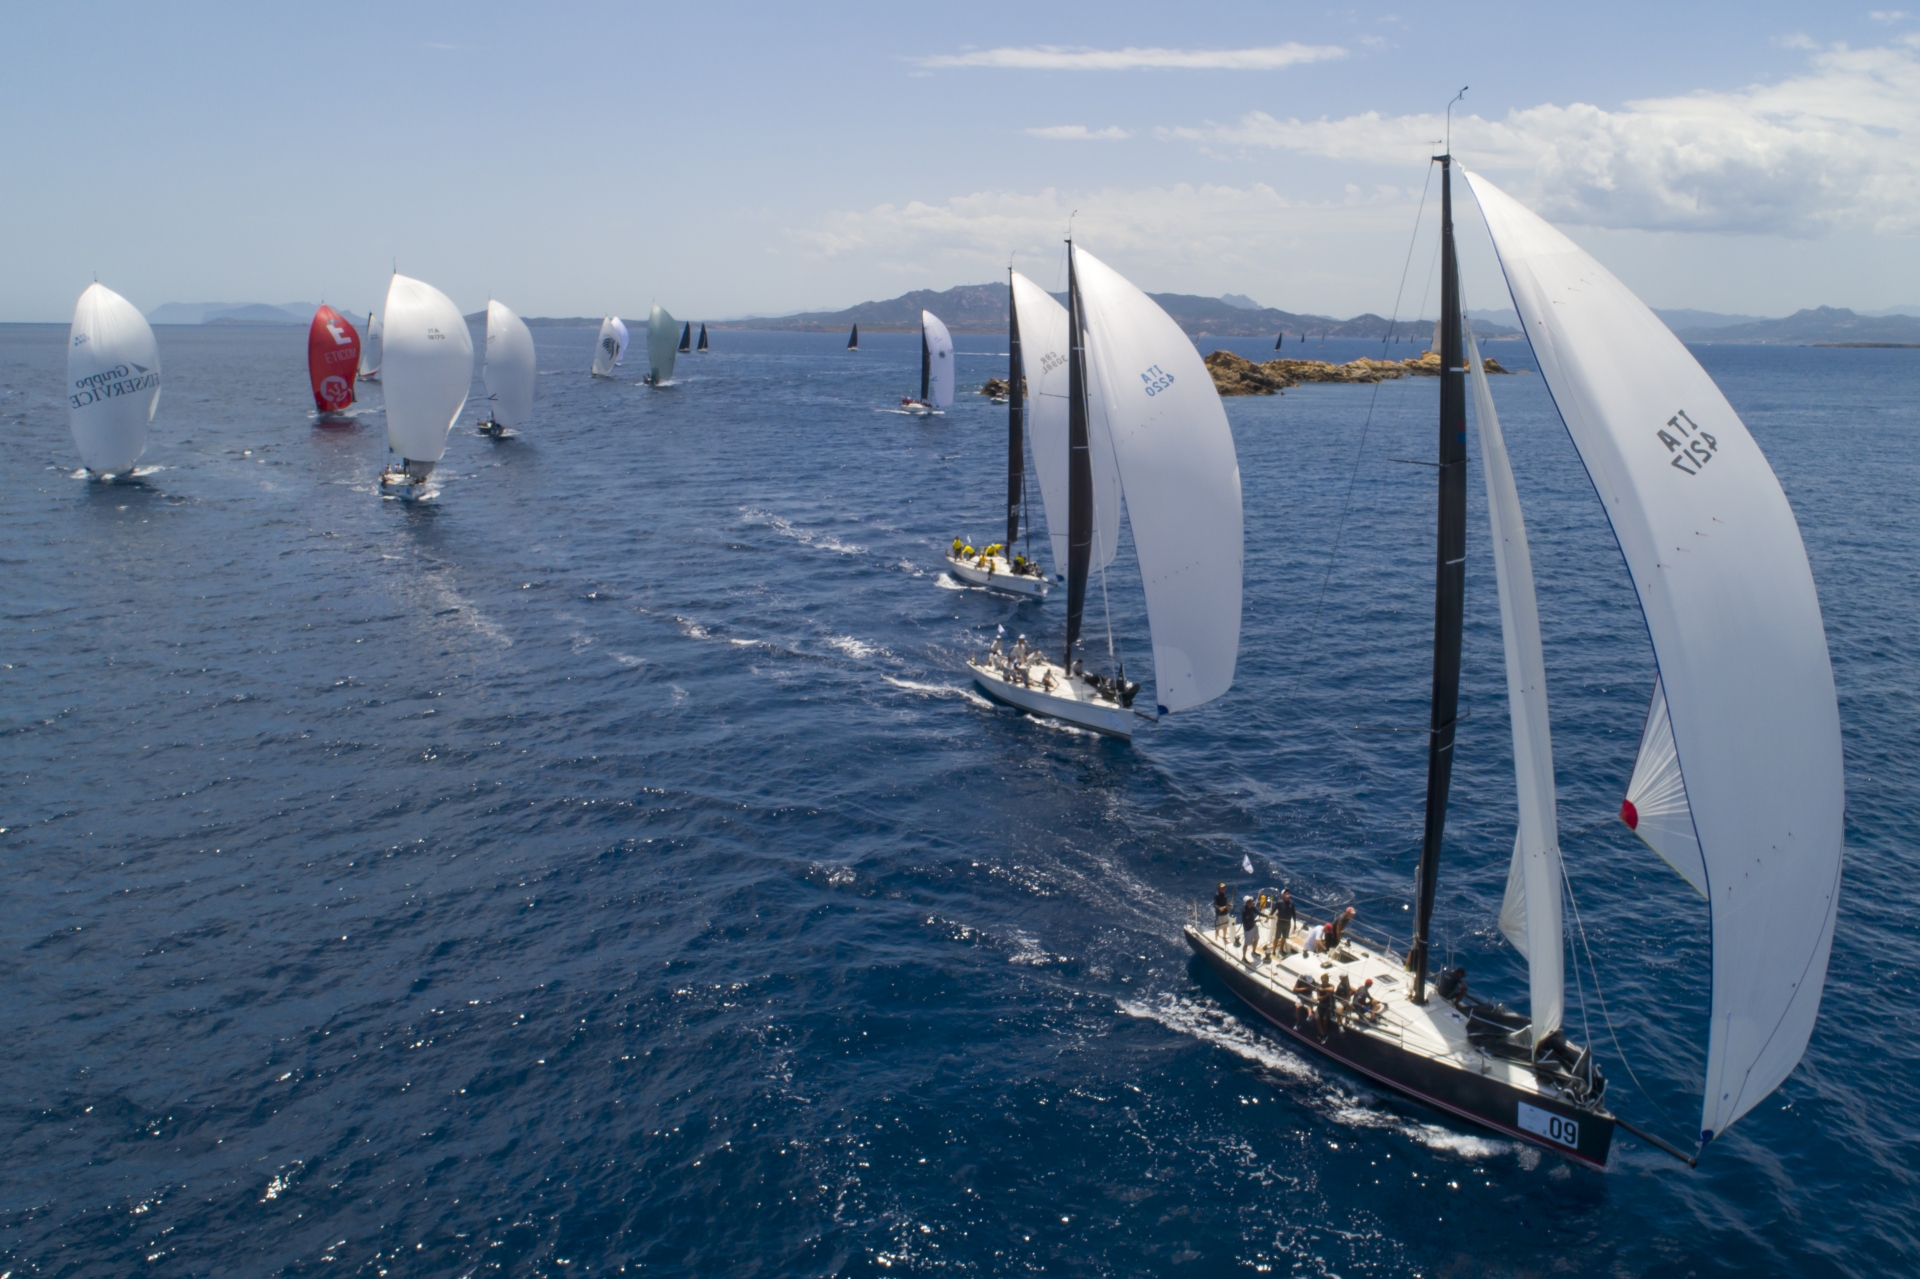 Slow but close racing offshore at the start of the 2022 ORC World Championship - Press Release - Yacht Club Costa Smeralda